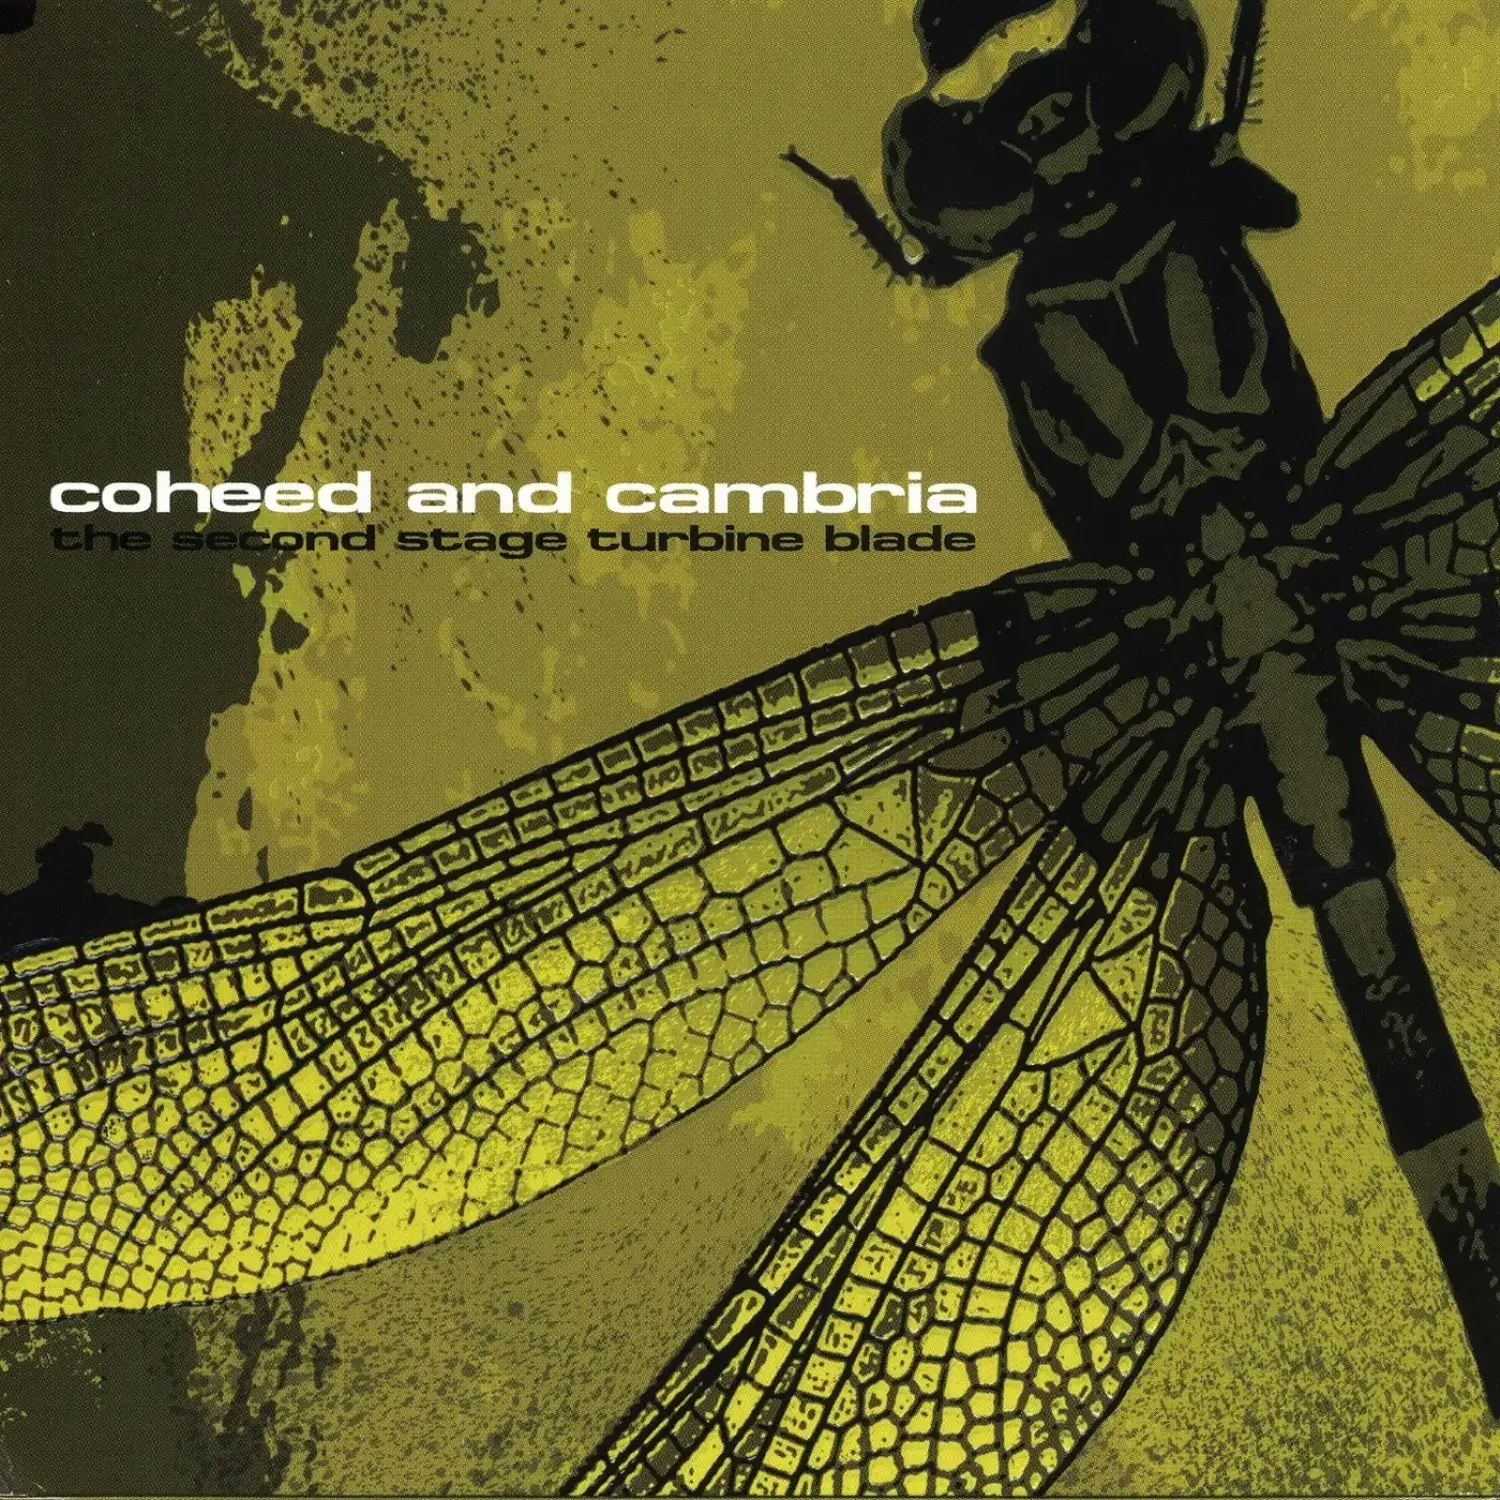 Album artwork for The Second Stage Turbine Blade by Coheed and Cambria